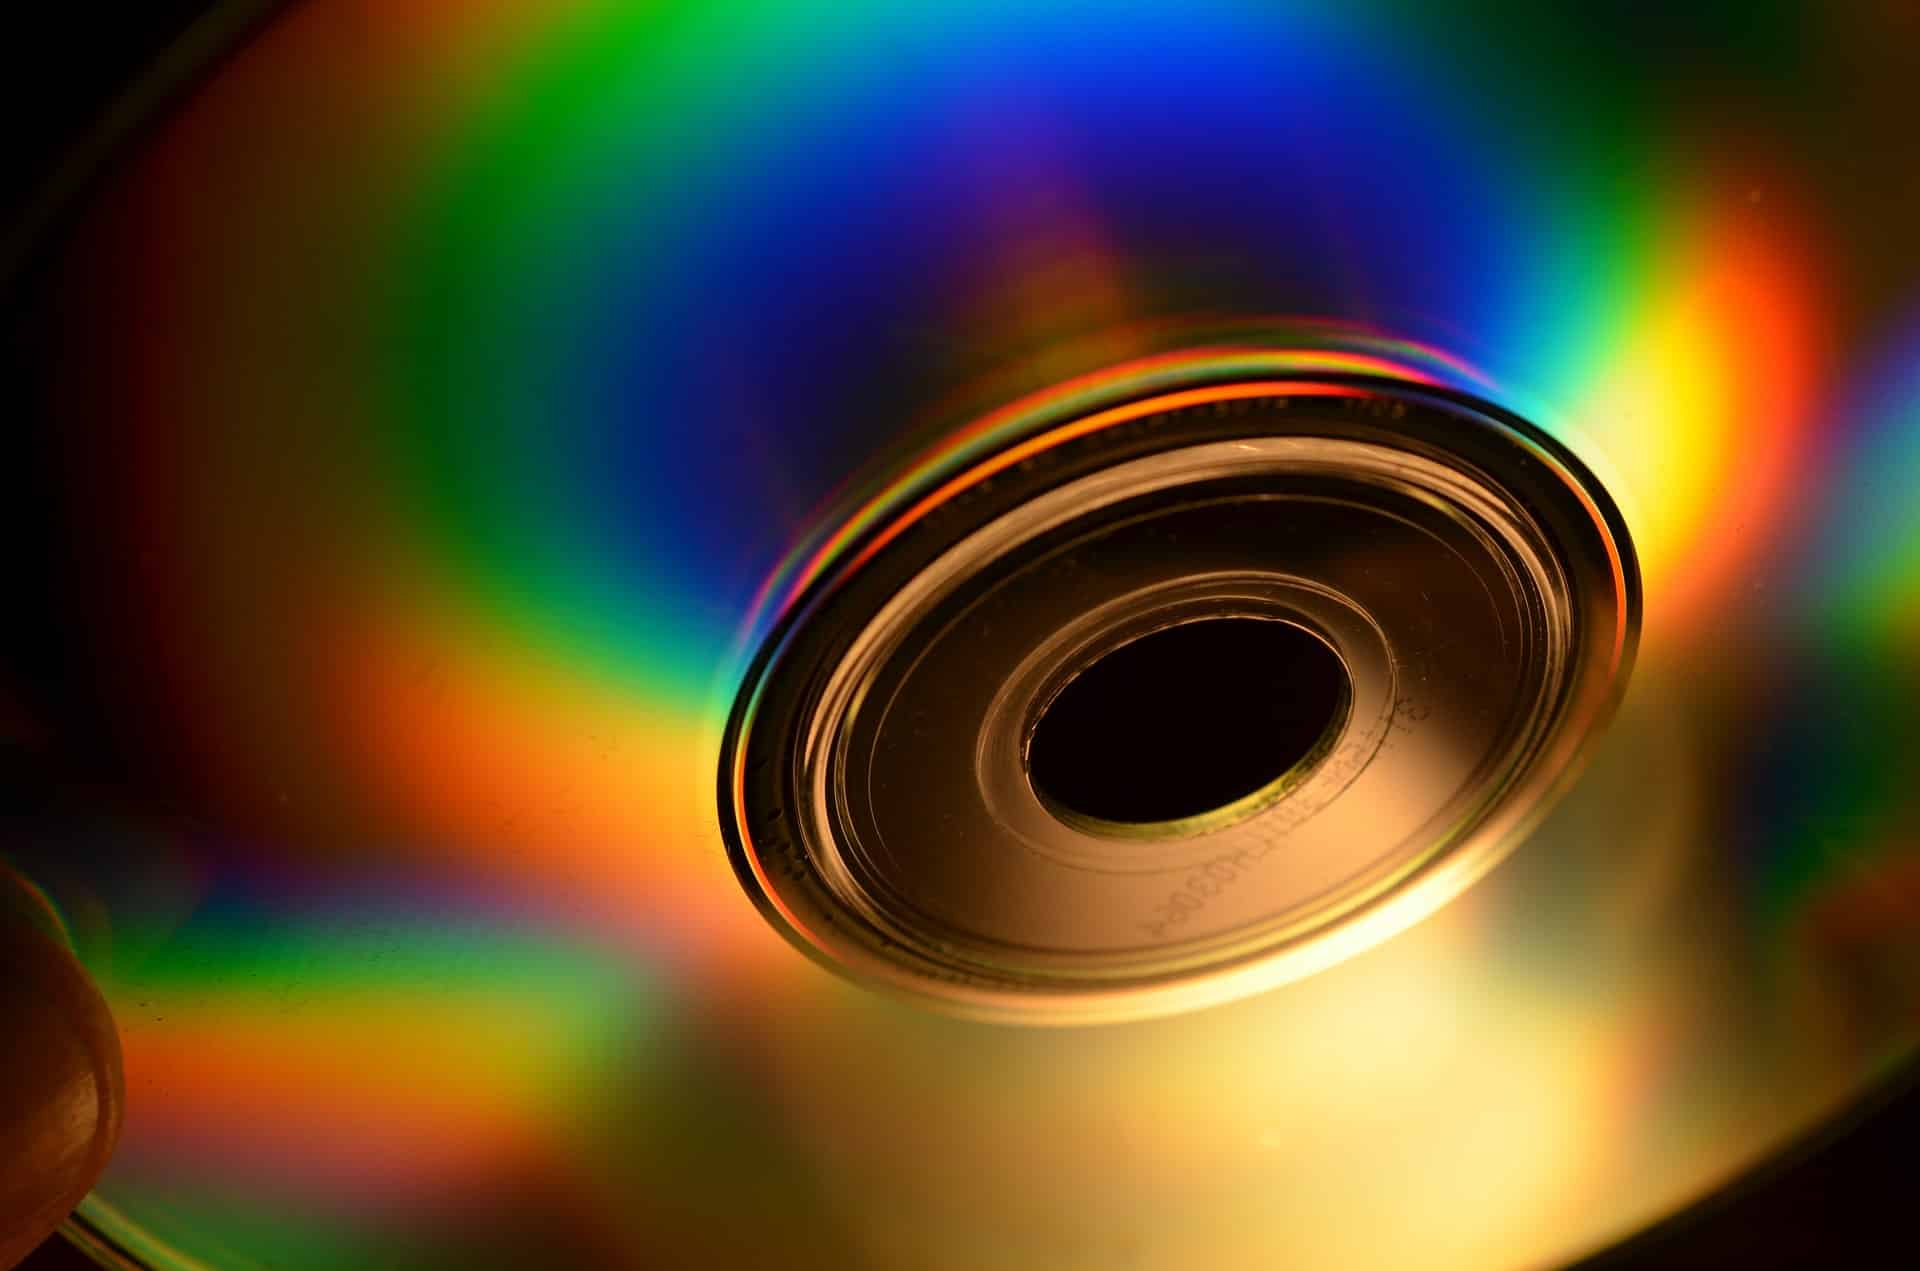 CD Duplication Services | In-House CD Duplication With Fast Turnaround!